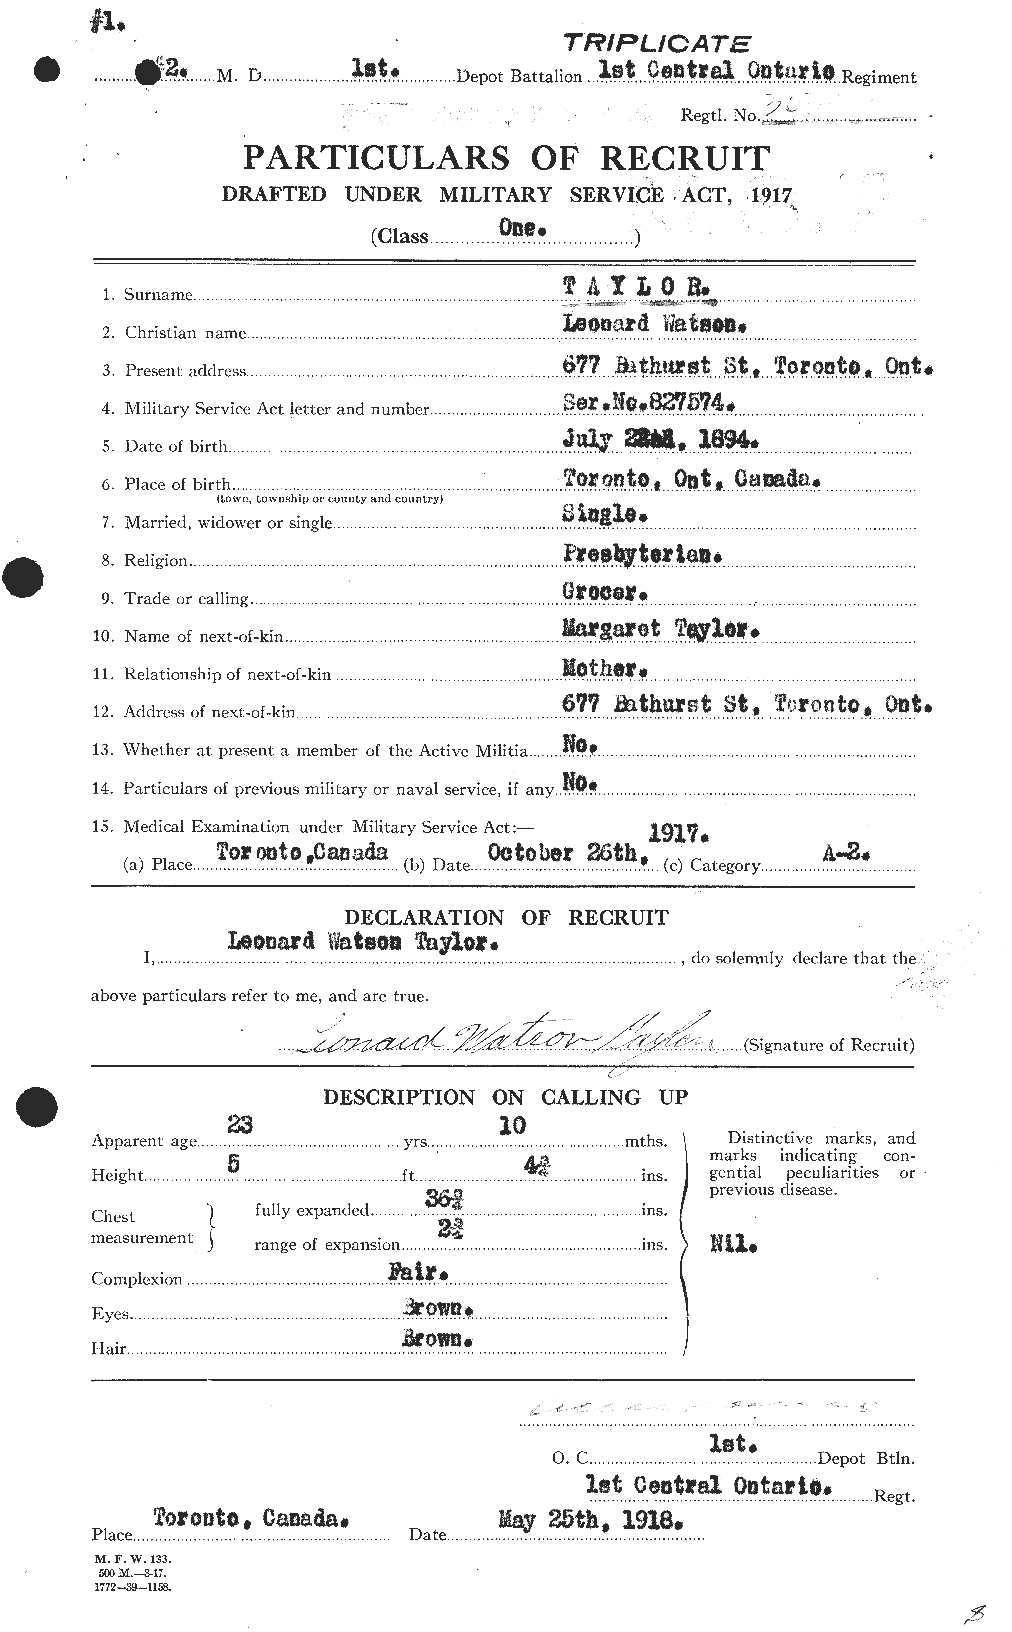 Personnel Records of the First World War - CEF 627633a